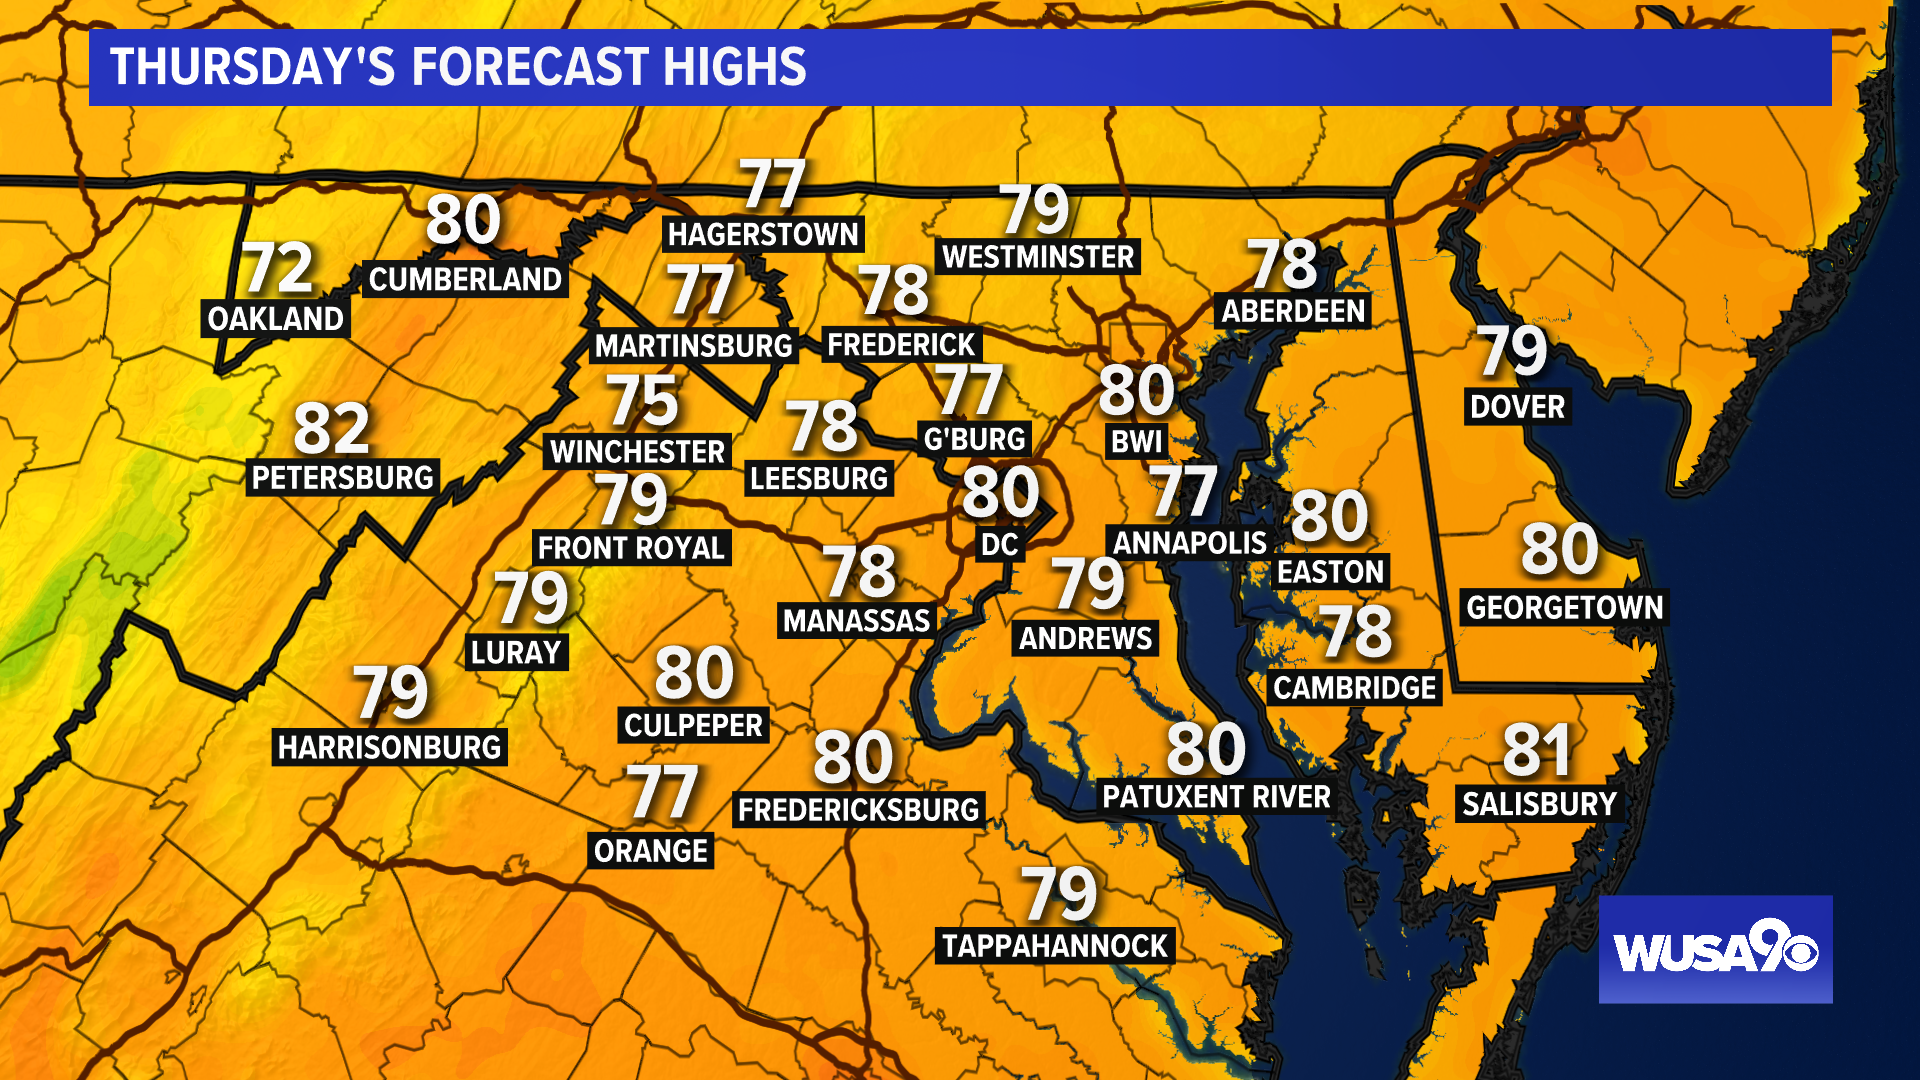 Right now it looks warm for our featured game of the week: the Lake Braddock/Robinson high school game.